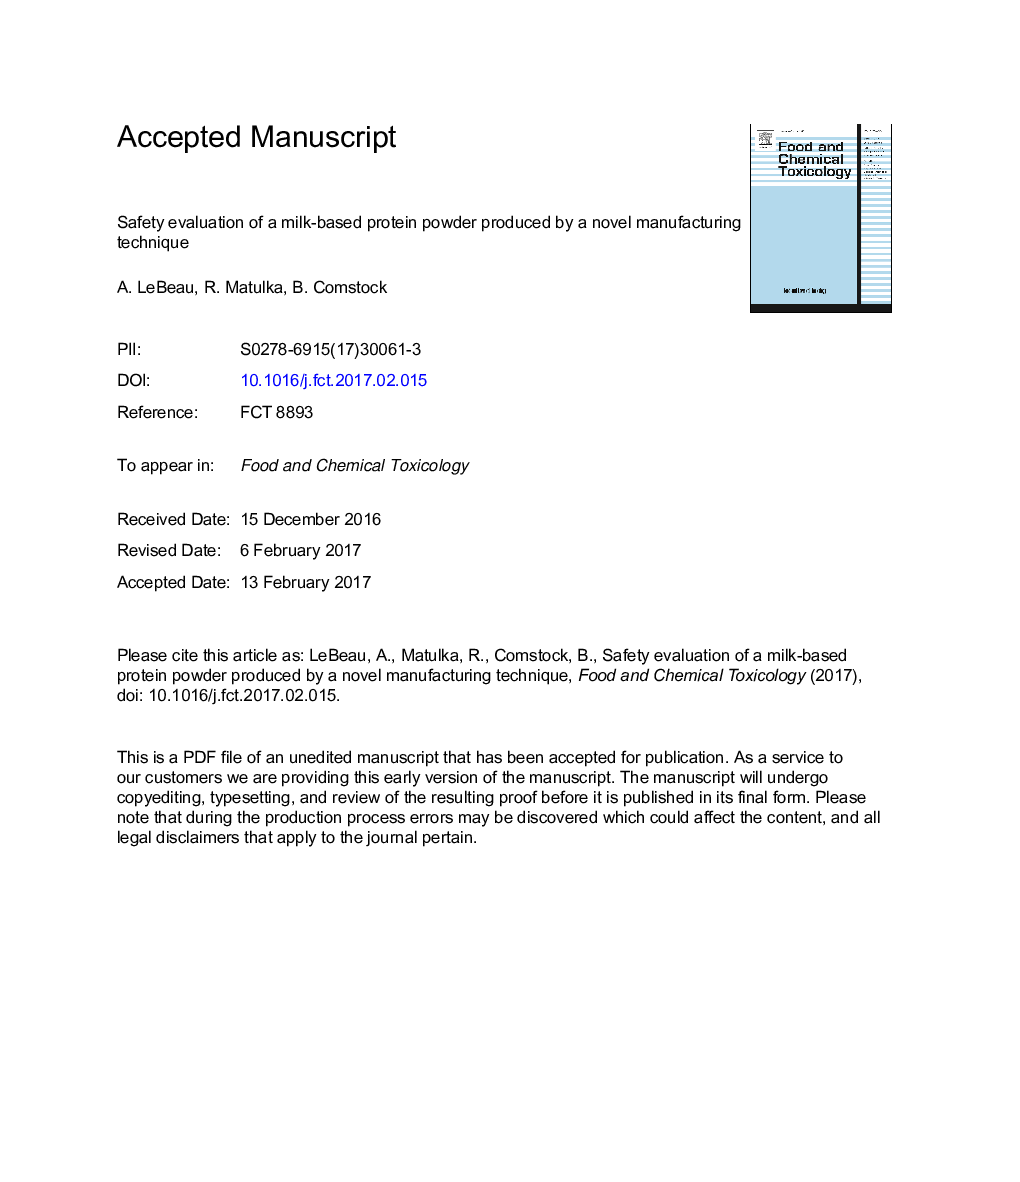 Safety evaluation of a milk-based protein powder produced by a novel manufacturing technique